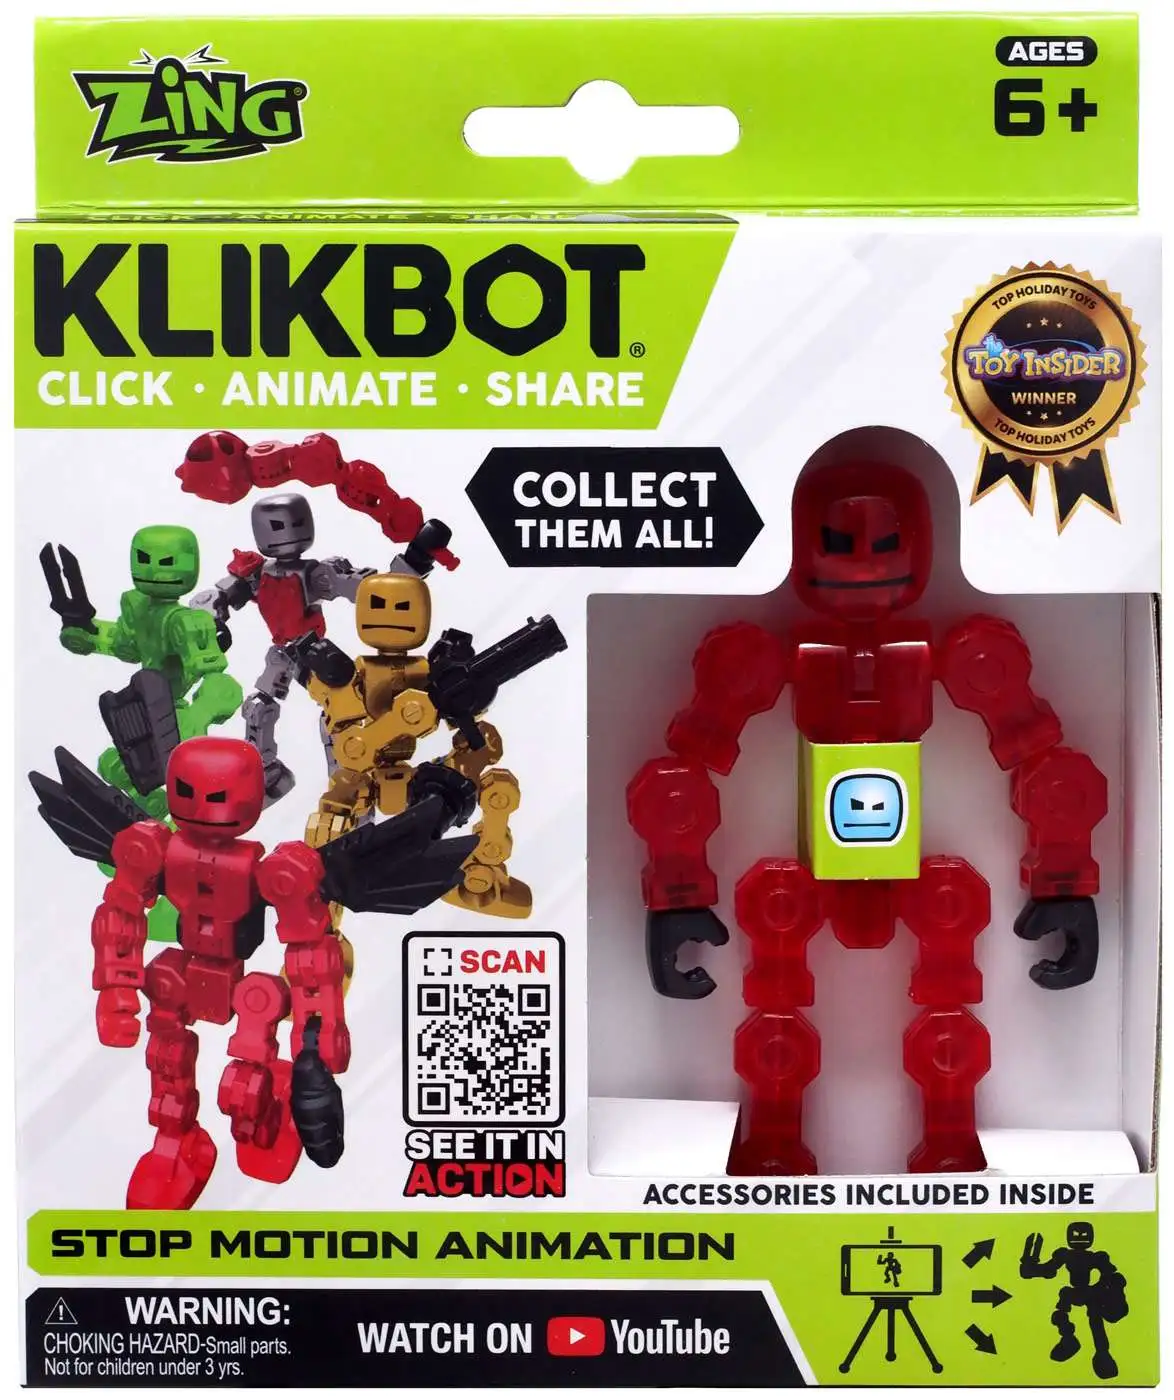 Zing StikBot Single Pack - Includes 1 StikBot - Collectible Action Figures  and Accessories, Stop Motion Animation, Ages 4 and Up (Solid Black Sparkle)